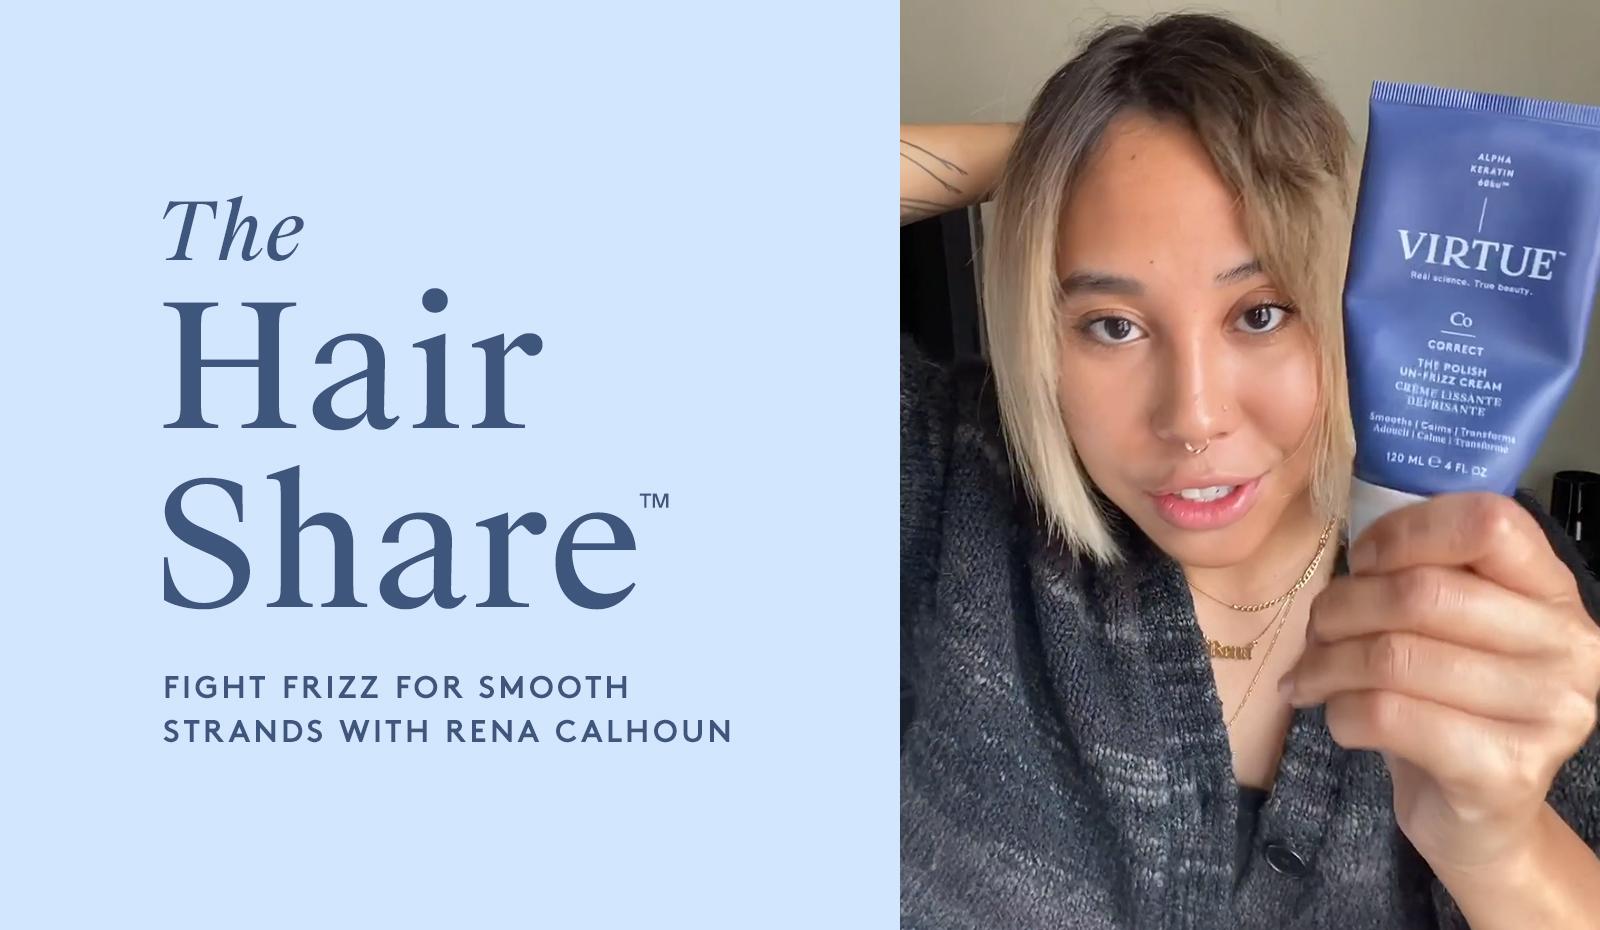 The Hair Share™: Fight Frizz For Smooth Strands with Rena Calhoun